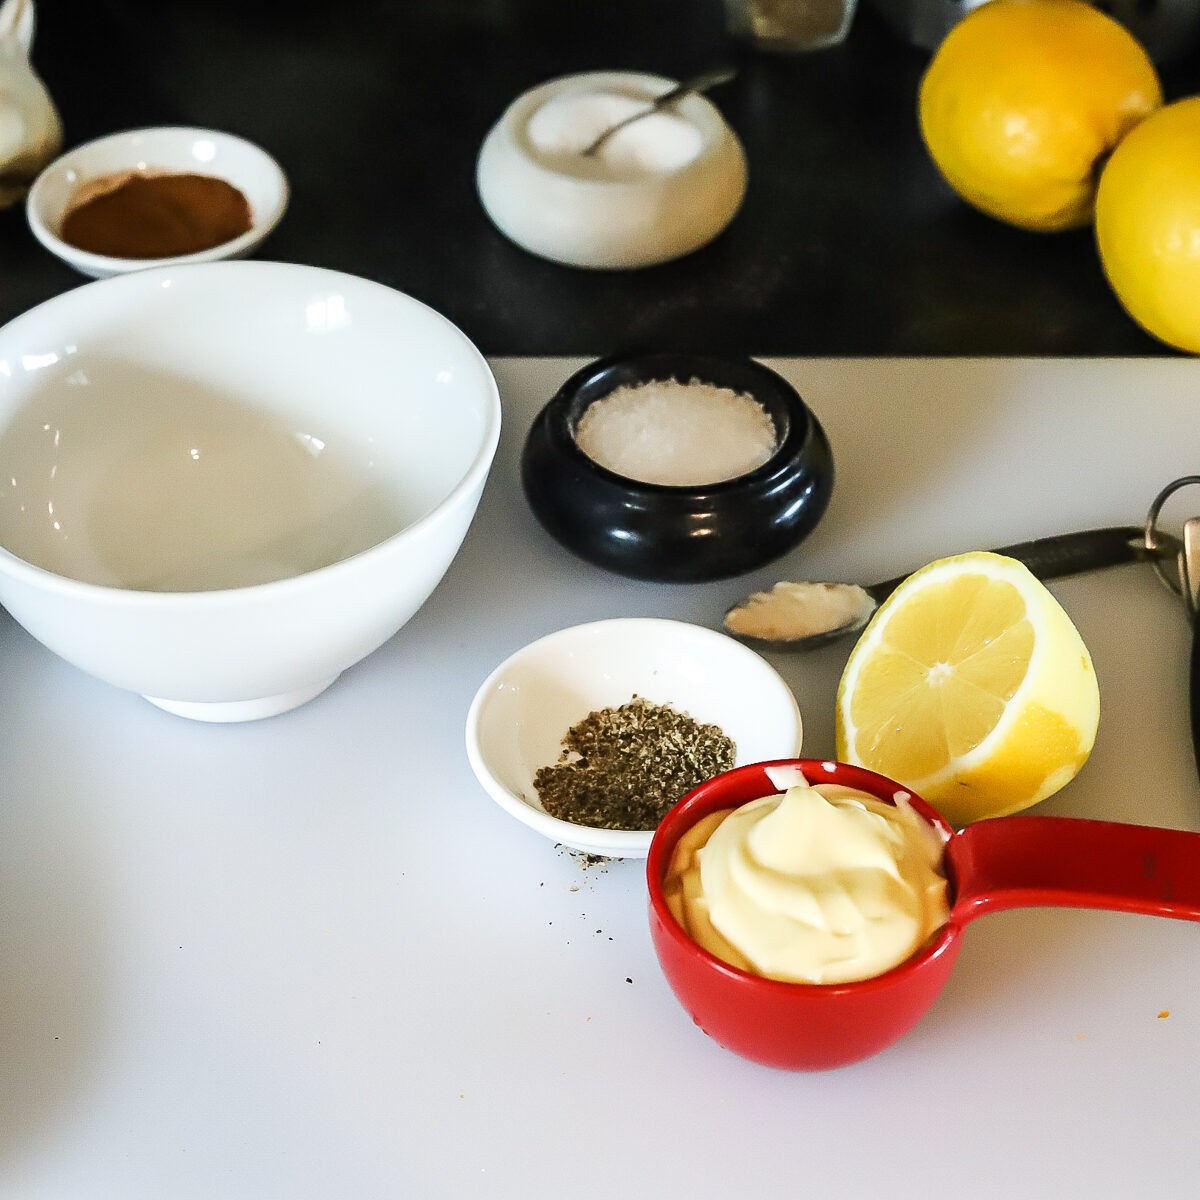 Ingredients for carpaccio dressing measured out in a red cup, and small white and black dishes with an empty bowl and cut lemon halfbeside.